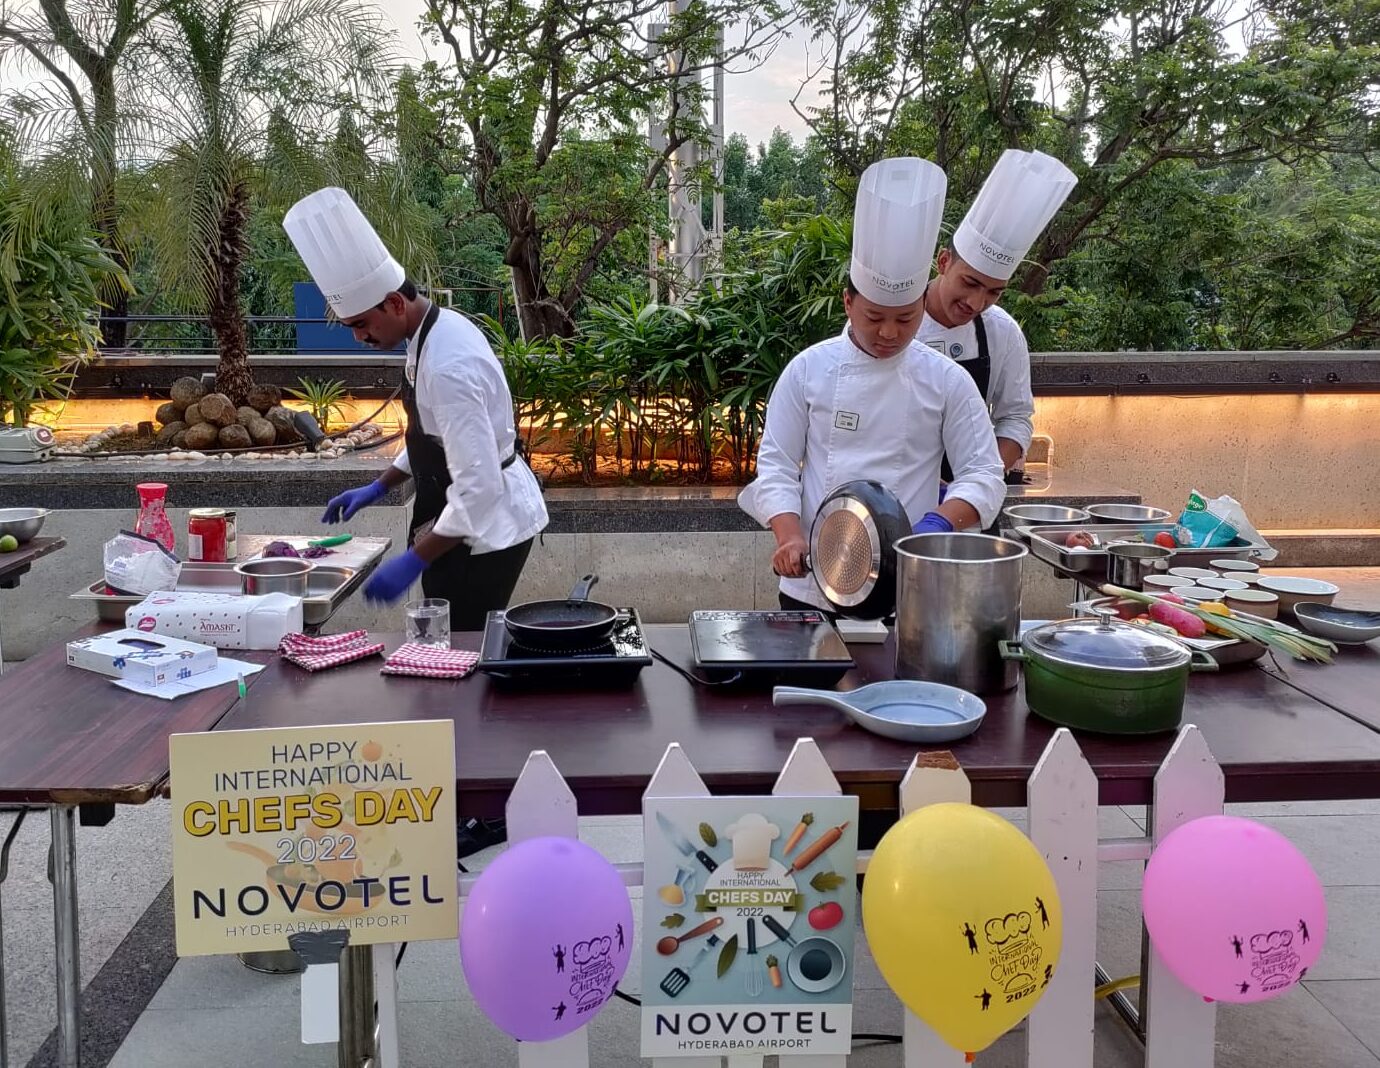 Novotel Hyderabad Airport Celebrates International Chef’s Day with a Wholesome Week of Events